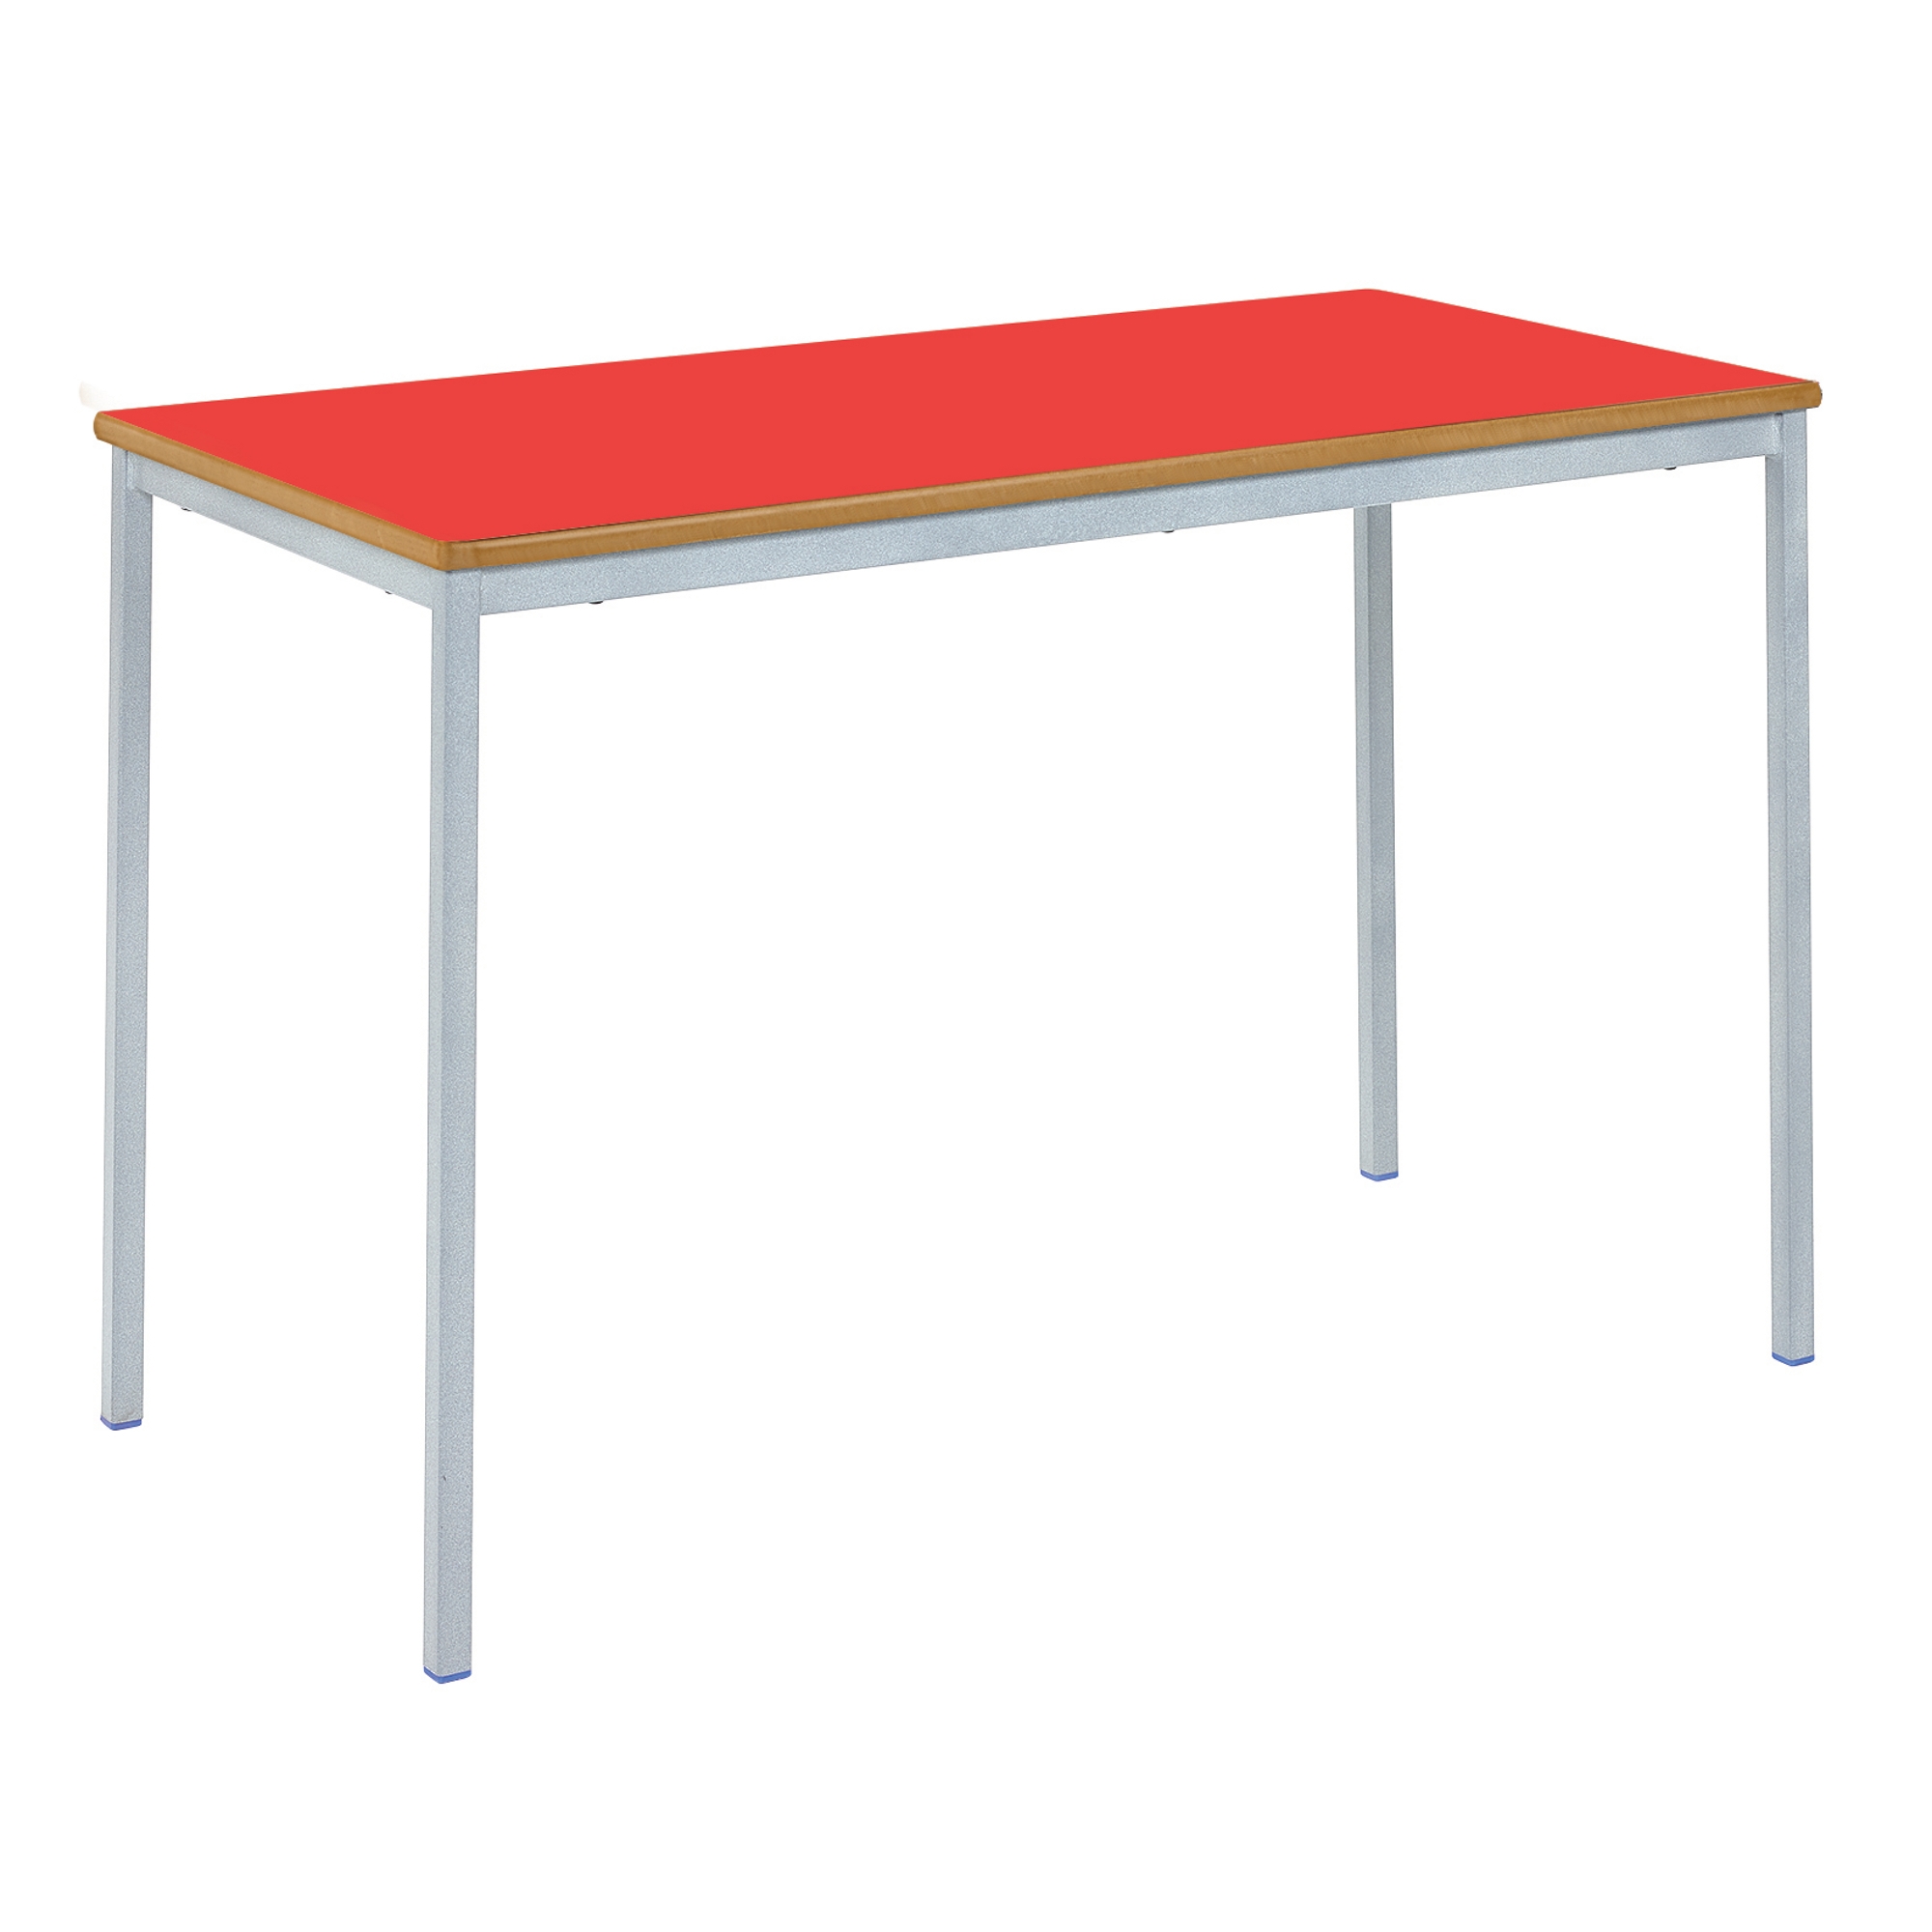 Classmates Rectangular Fully Welded Classroom Table - 1100 x 550 x 640mm - Red